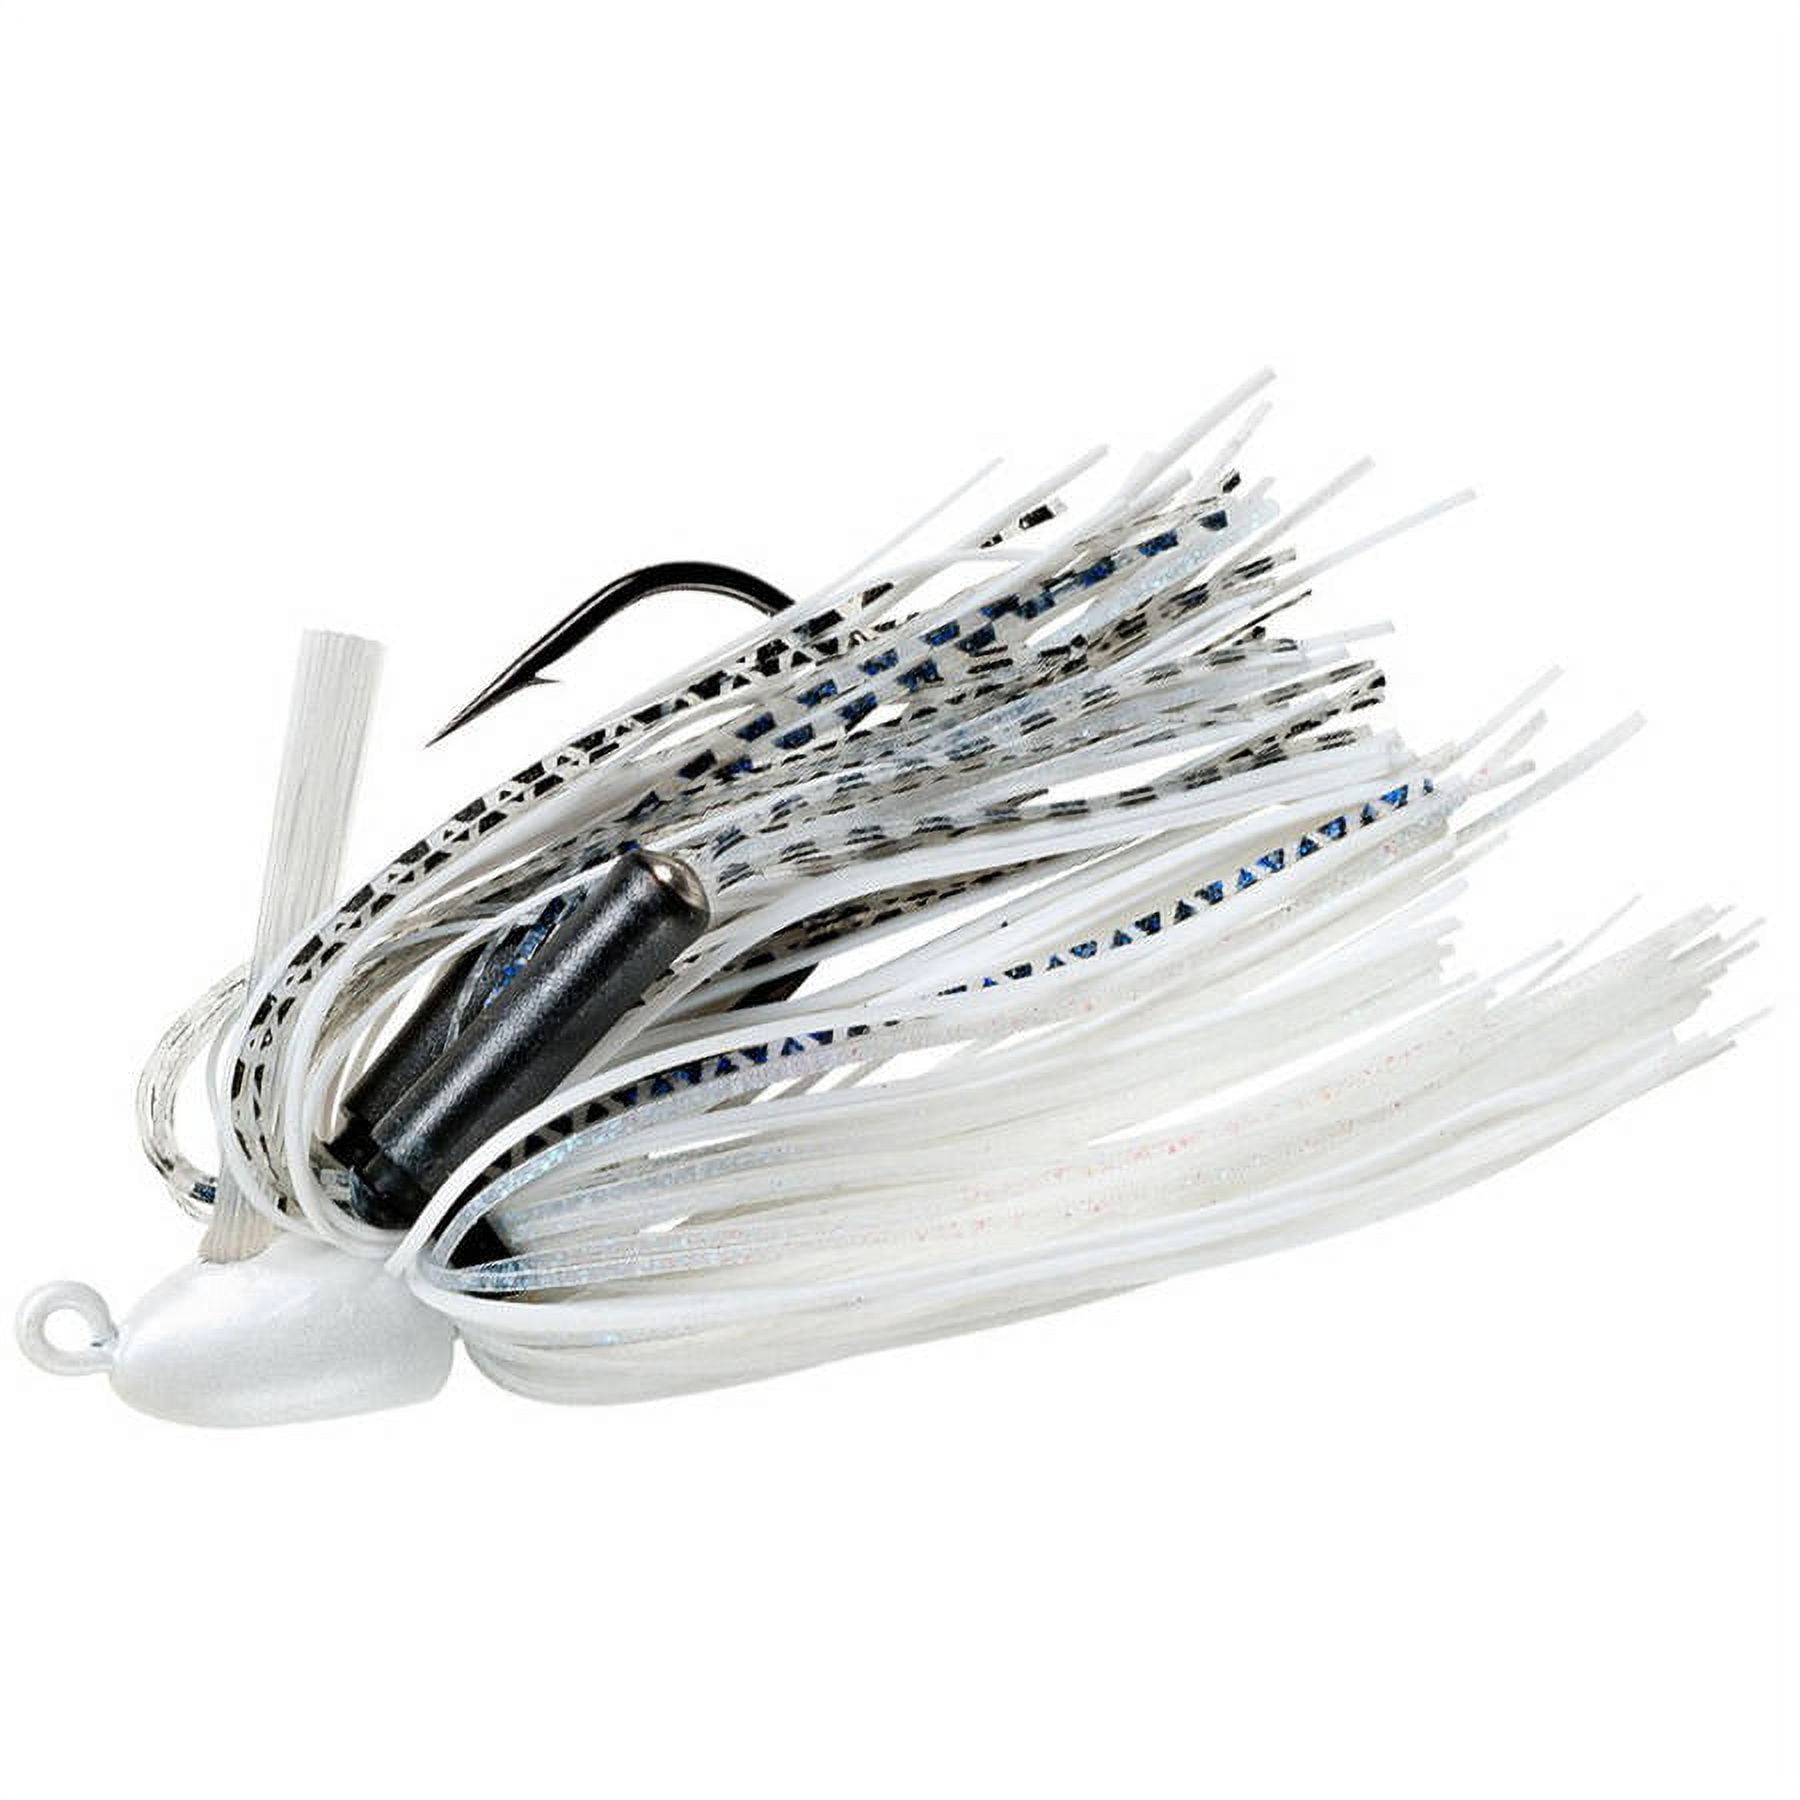 BOOYAH Boo Jig - Pearl White Shad - 1/4oz Weedless Rattles Bass Lure 